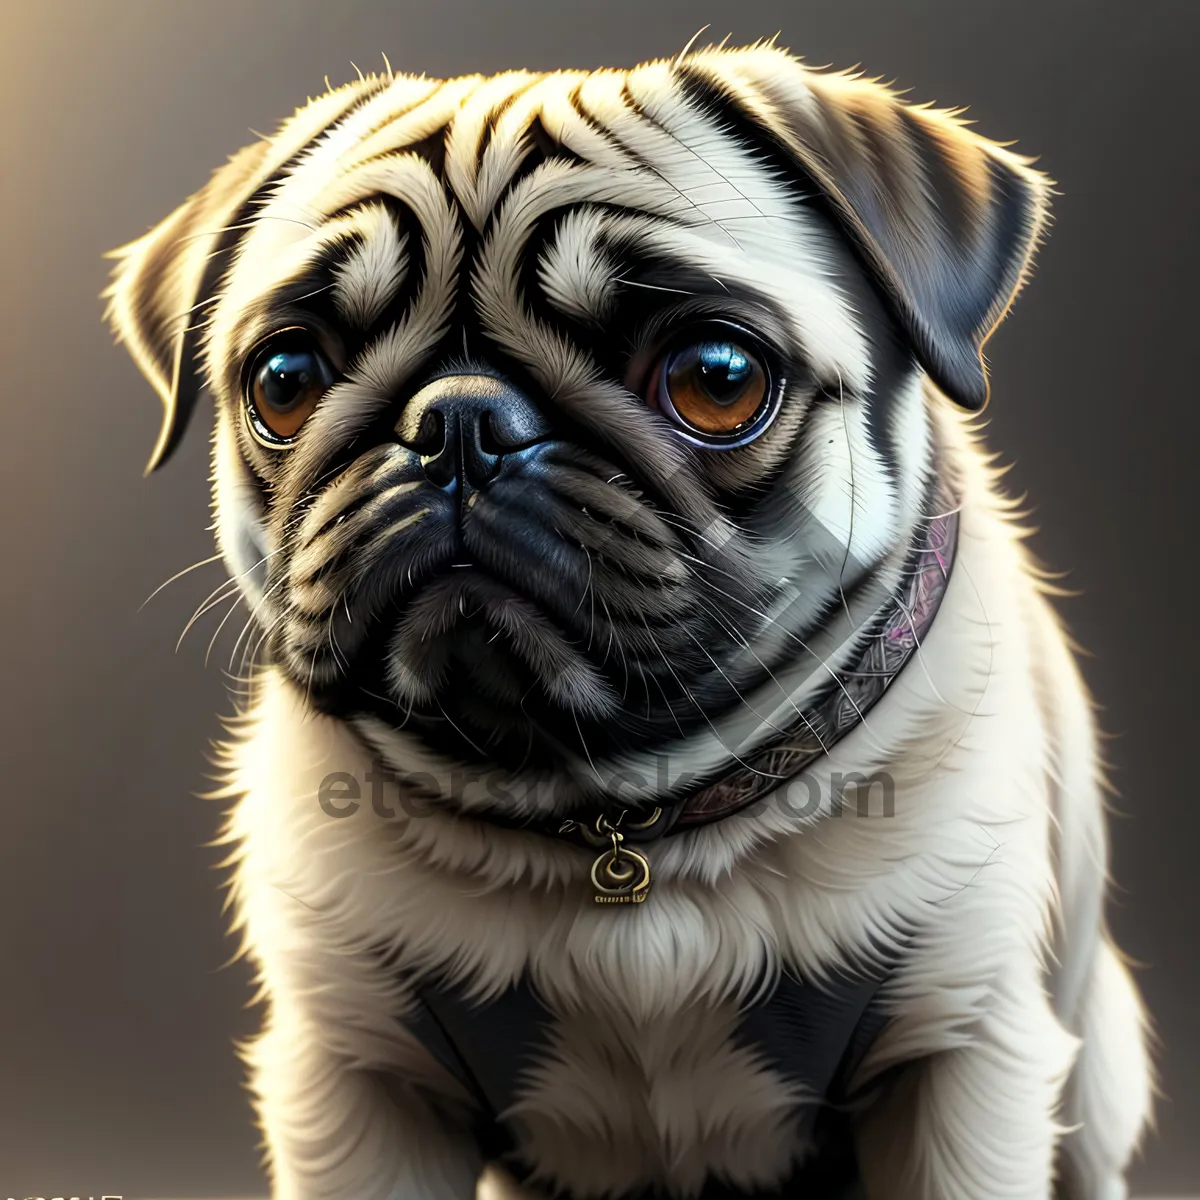 Picture of Pug Bulldog - Adorable Wrinkly Canine Portrait